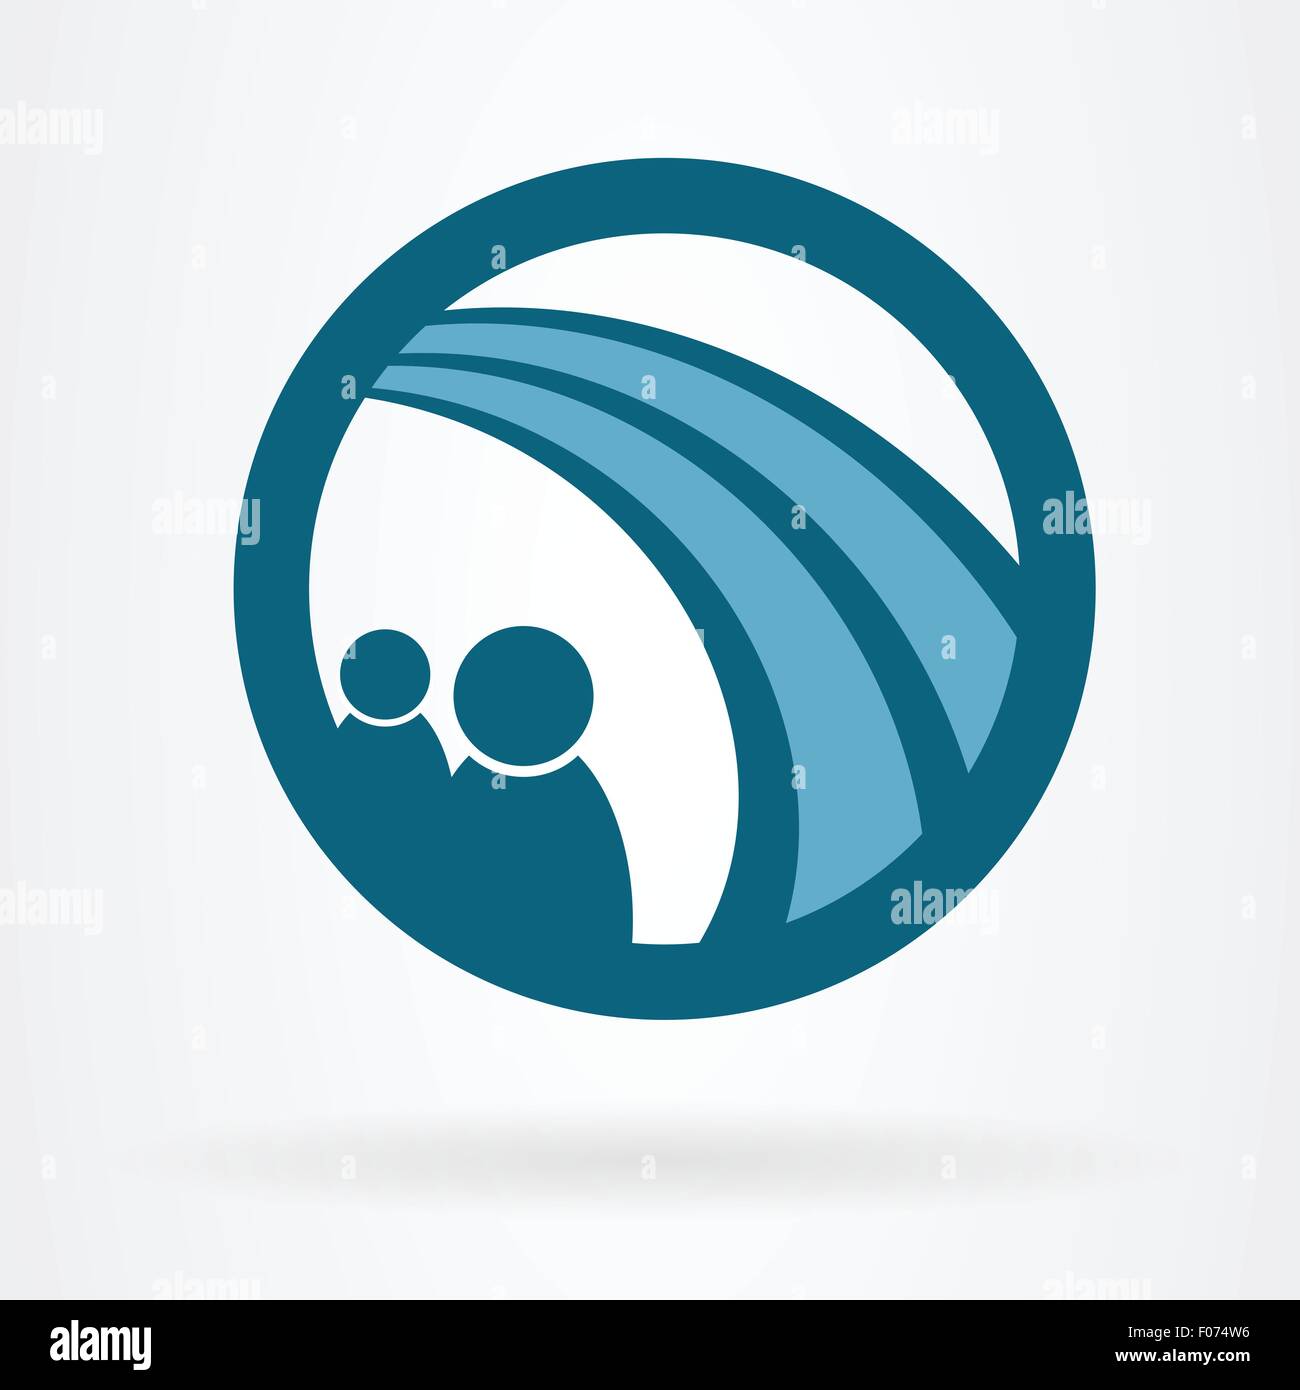 people and road symbol icon vector illustration Stock Vector